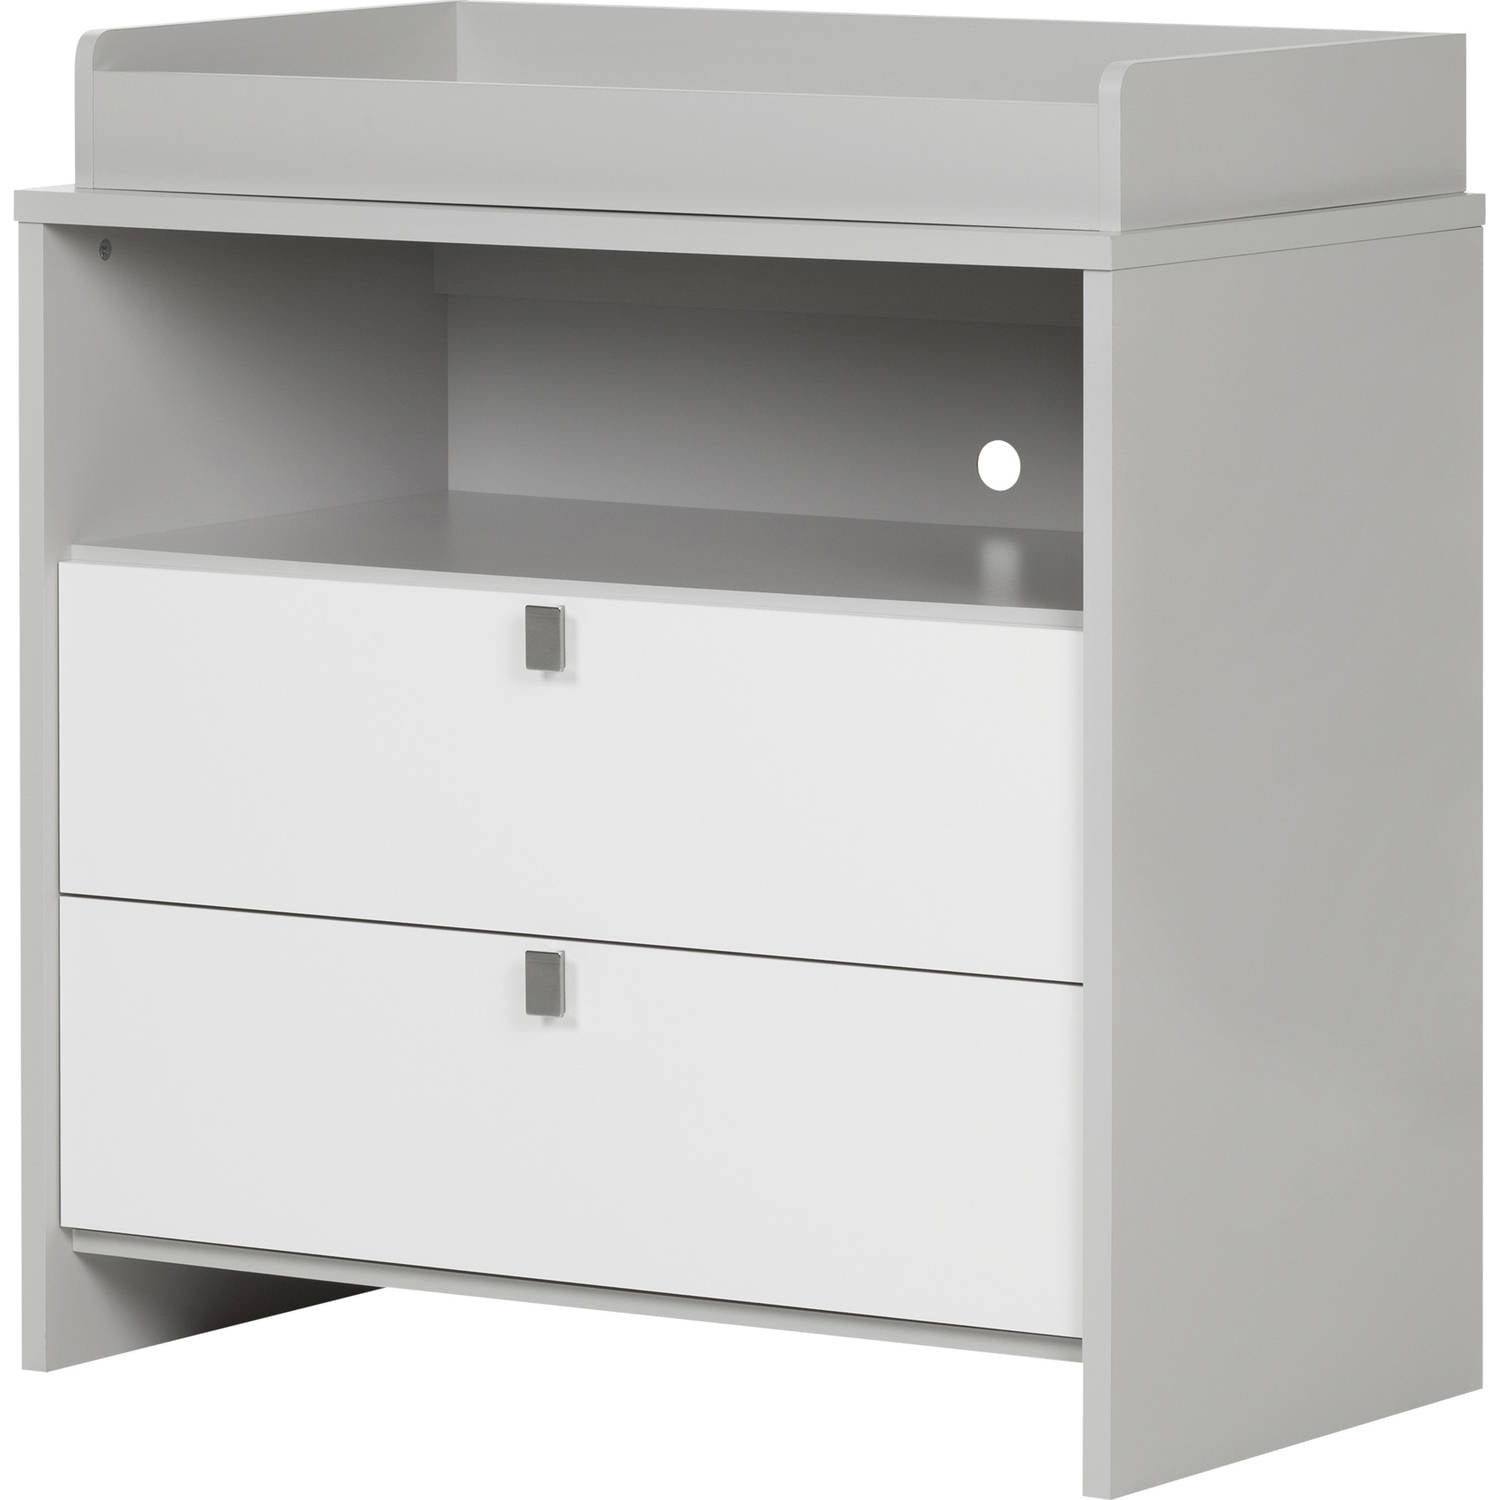 South S Cookie Changing Table, Add Changing Table To Dresser